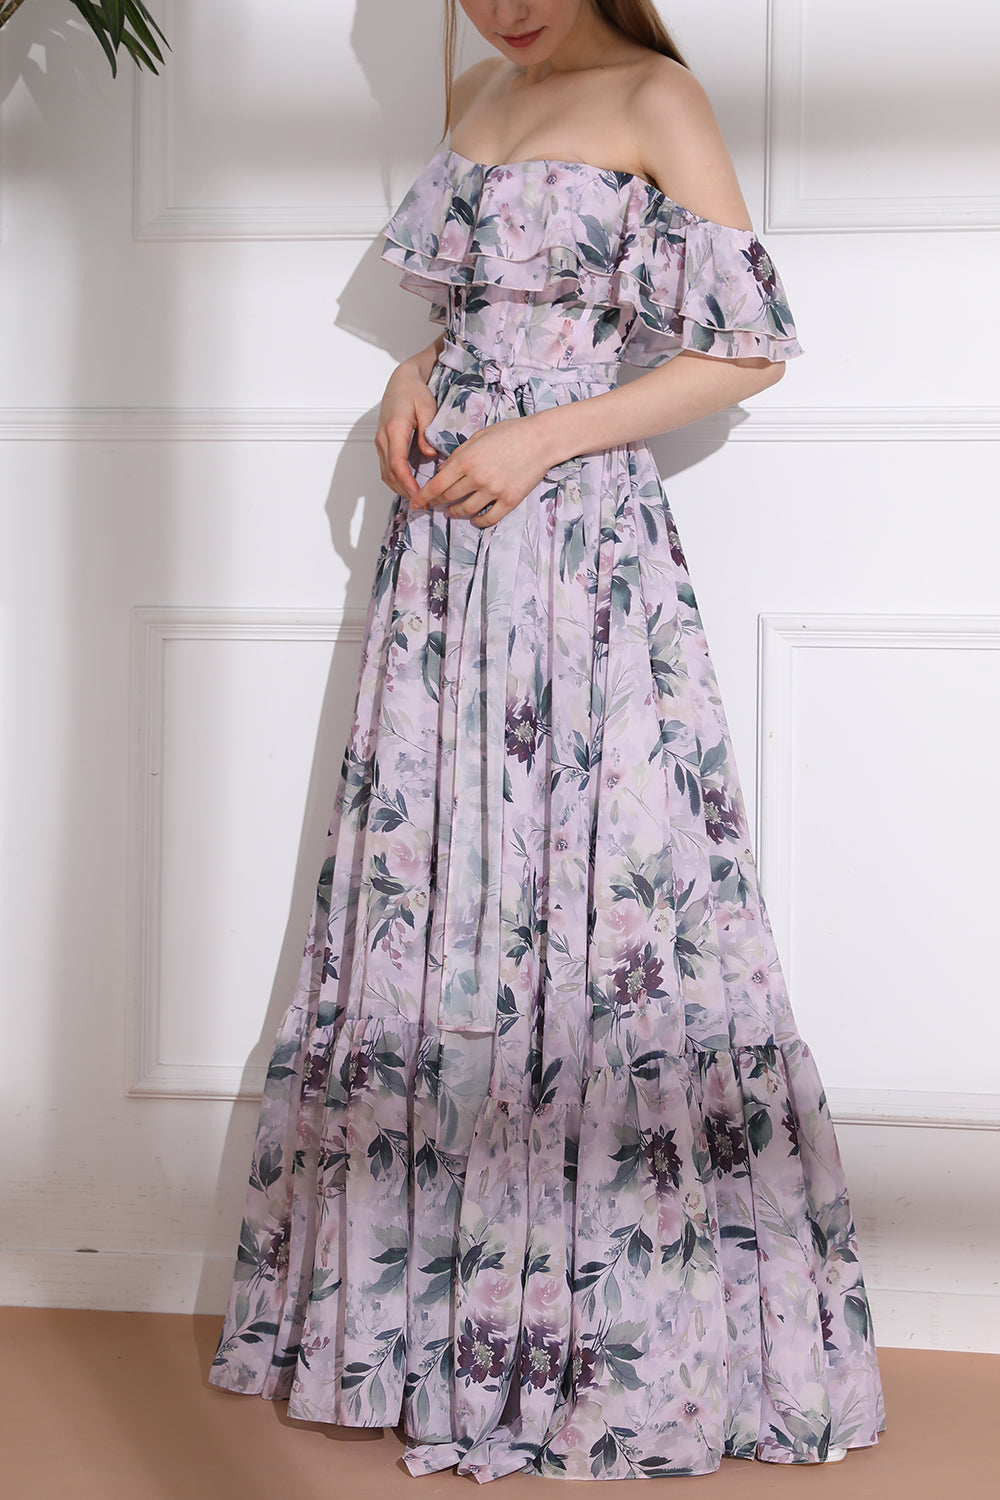 Off the Shoulder Corset Floral Print Chiffon Tiered Dress